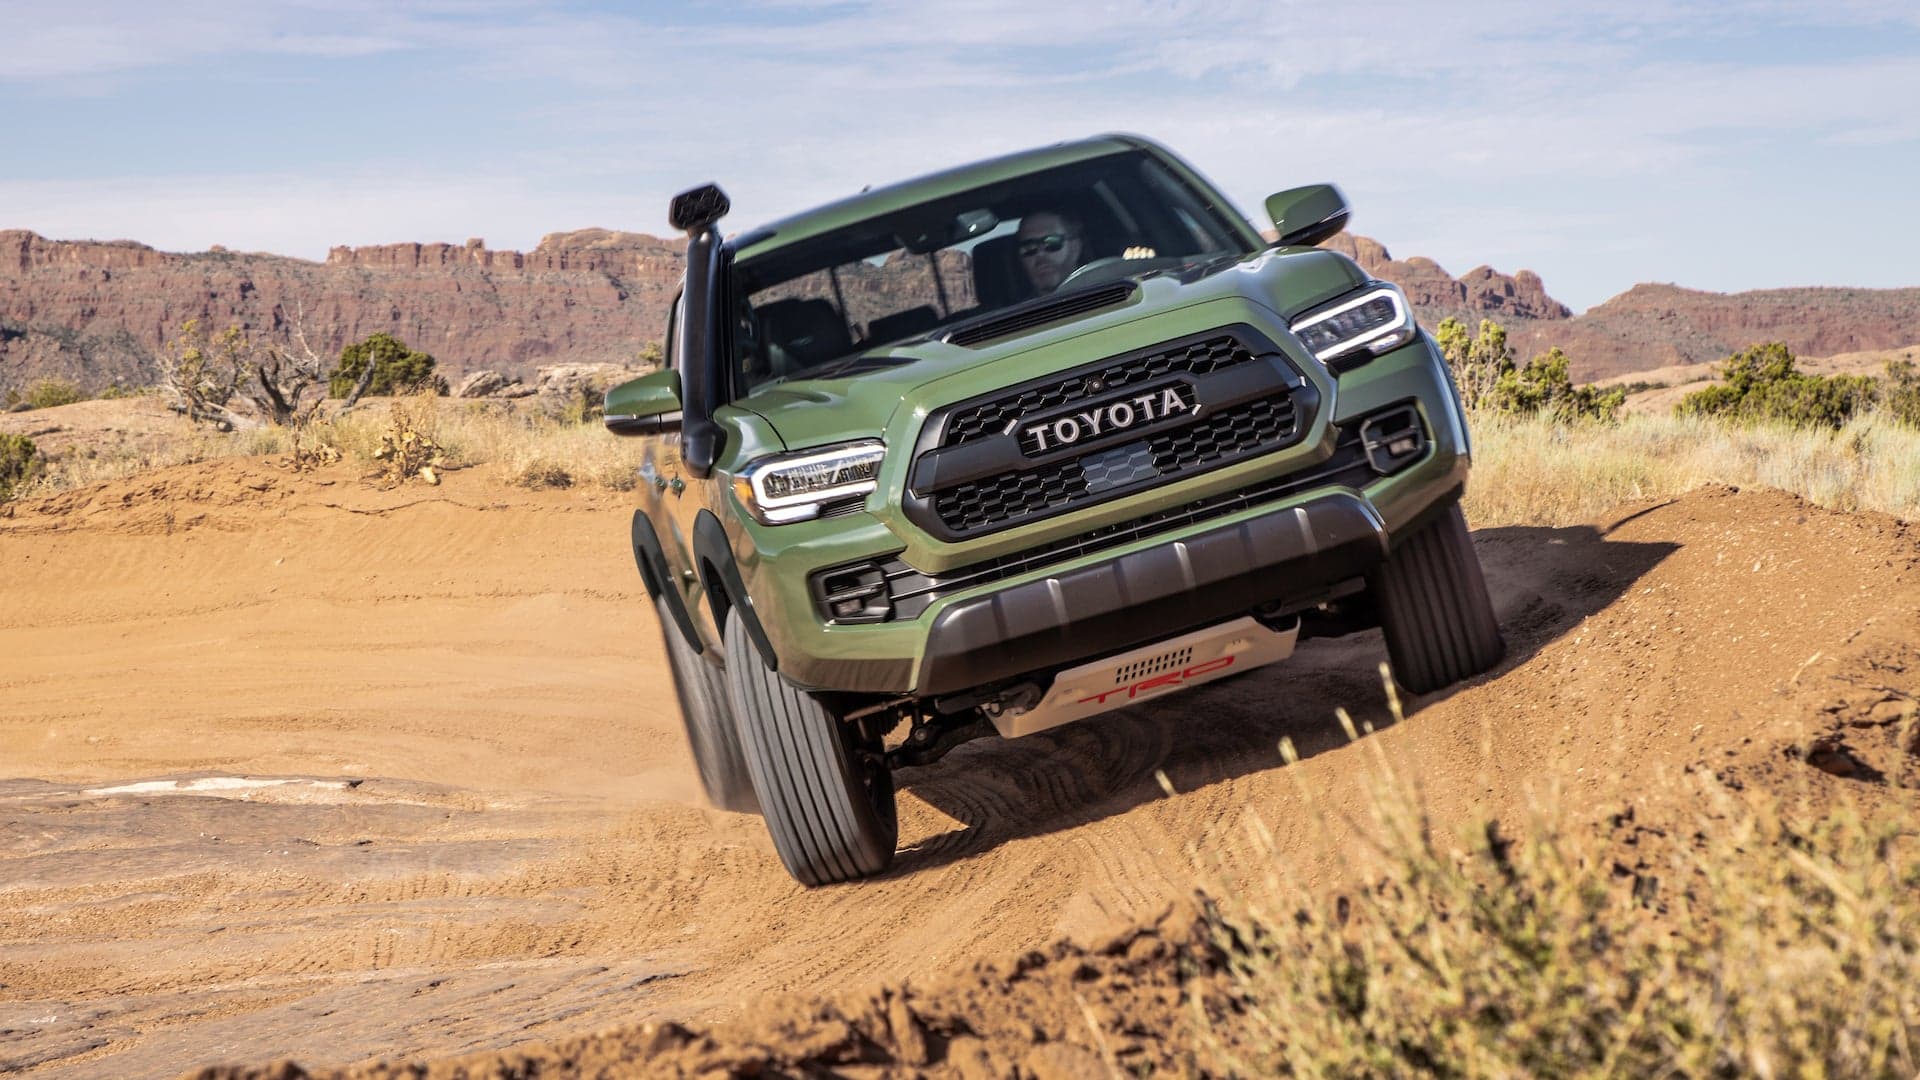 The 2020 Toyota Tacoma Is an Old-School Pickup Learning New Tech Tricks